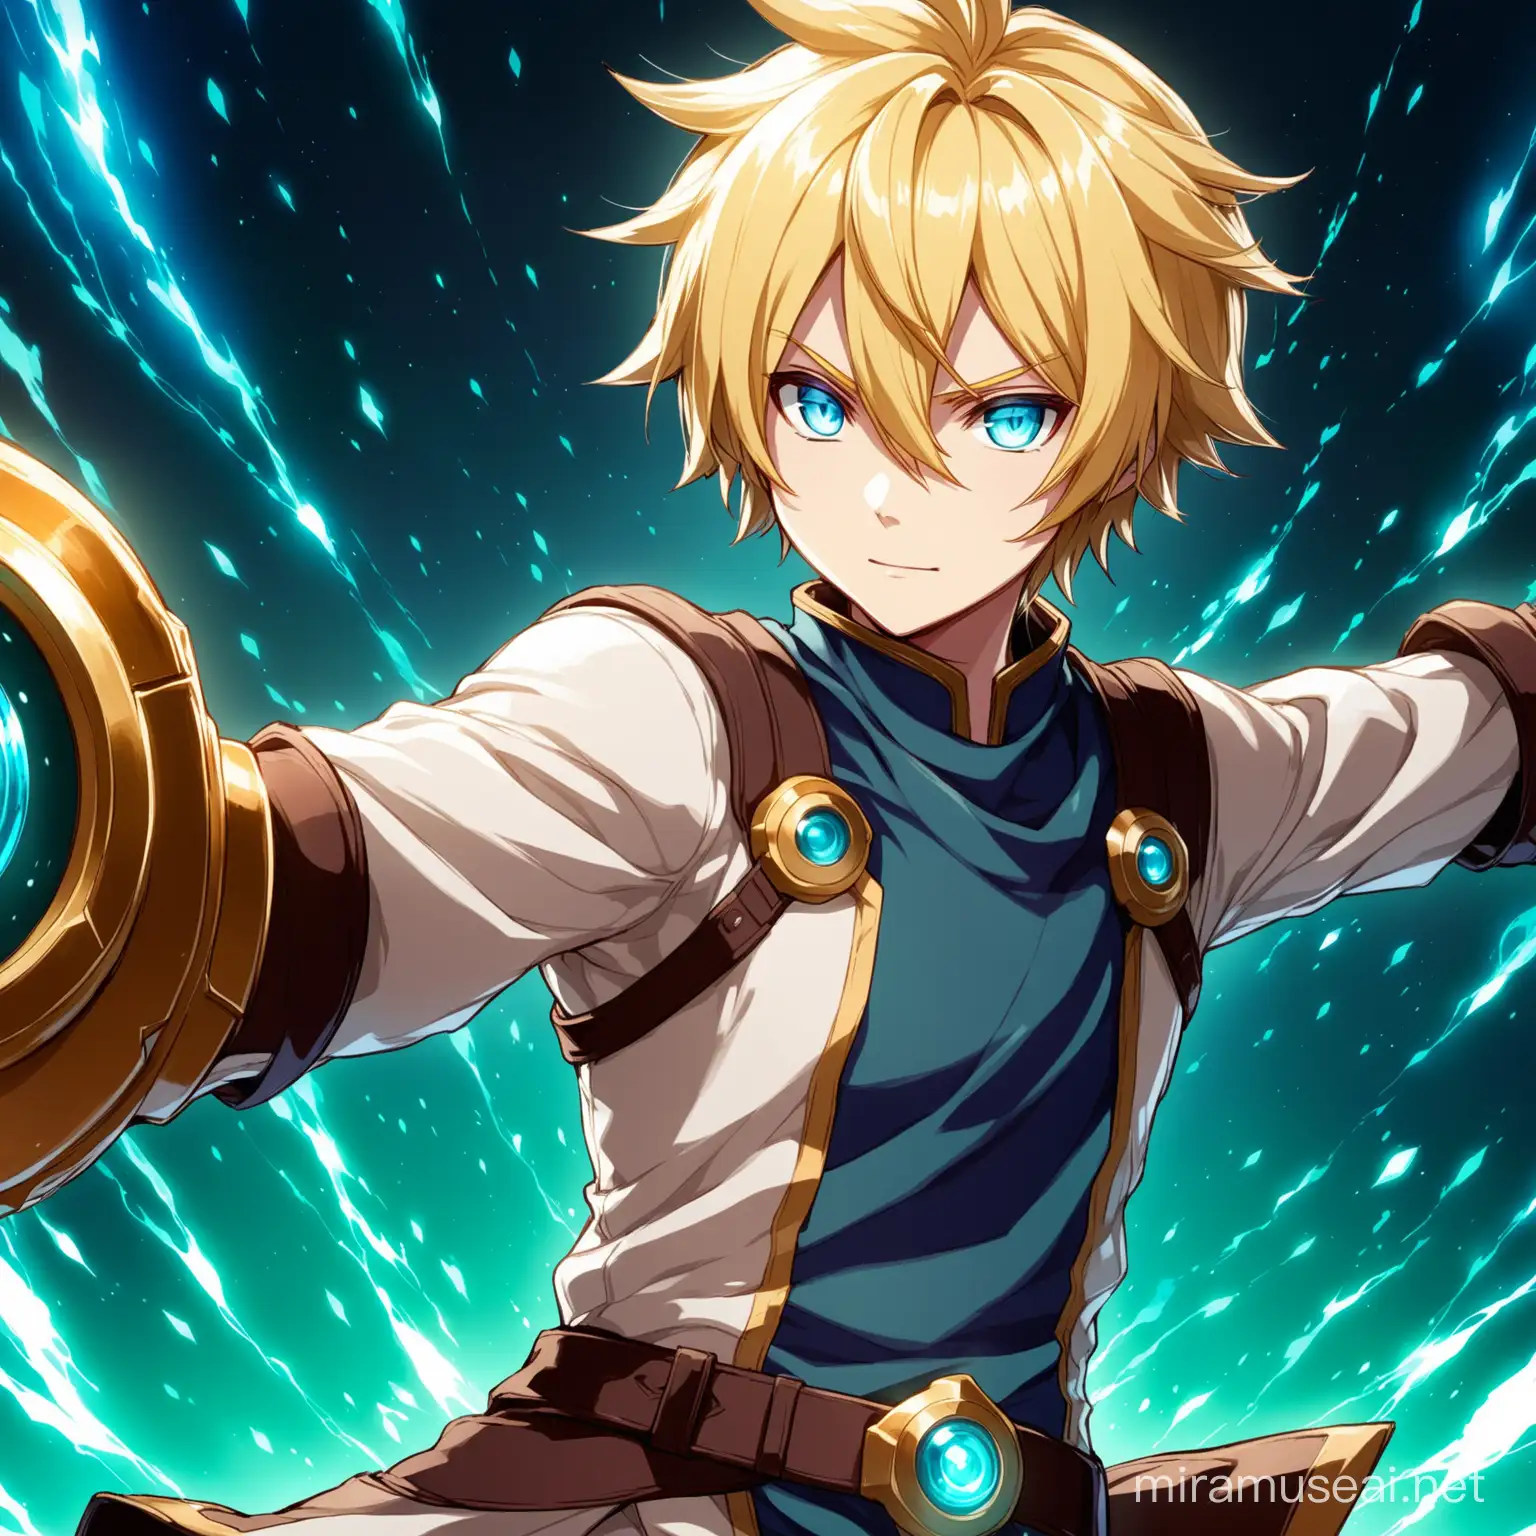 Ezreal the Prodigal Explorer in Animated League of Legends Scene